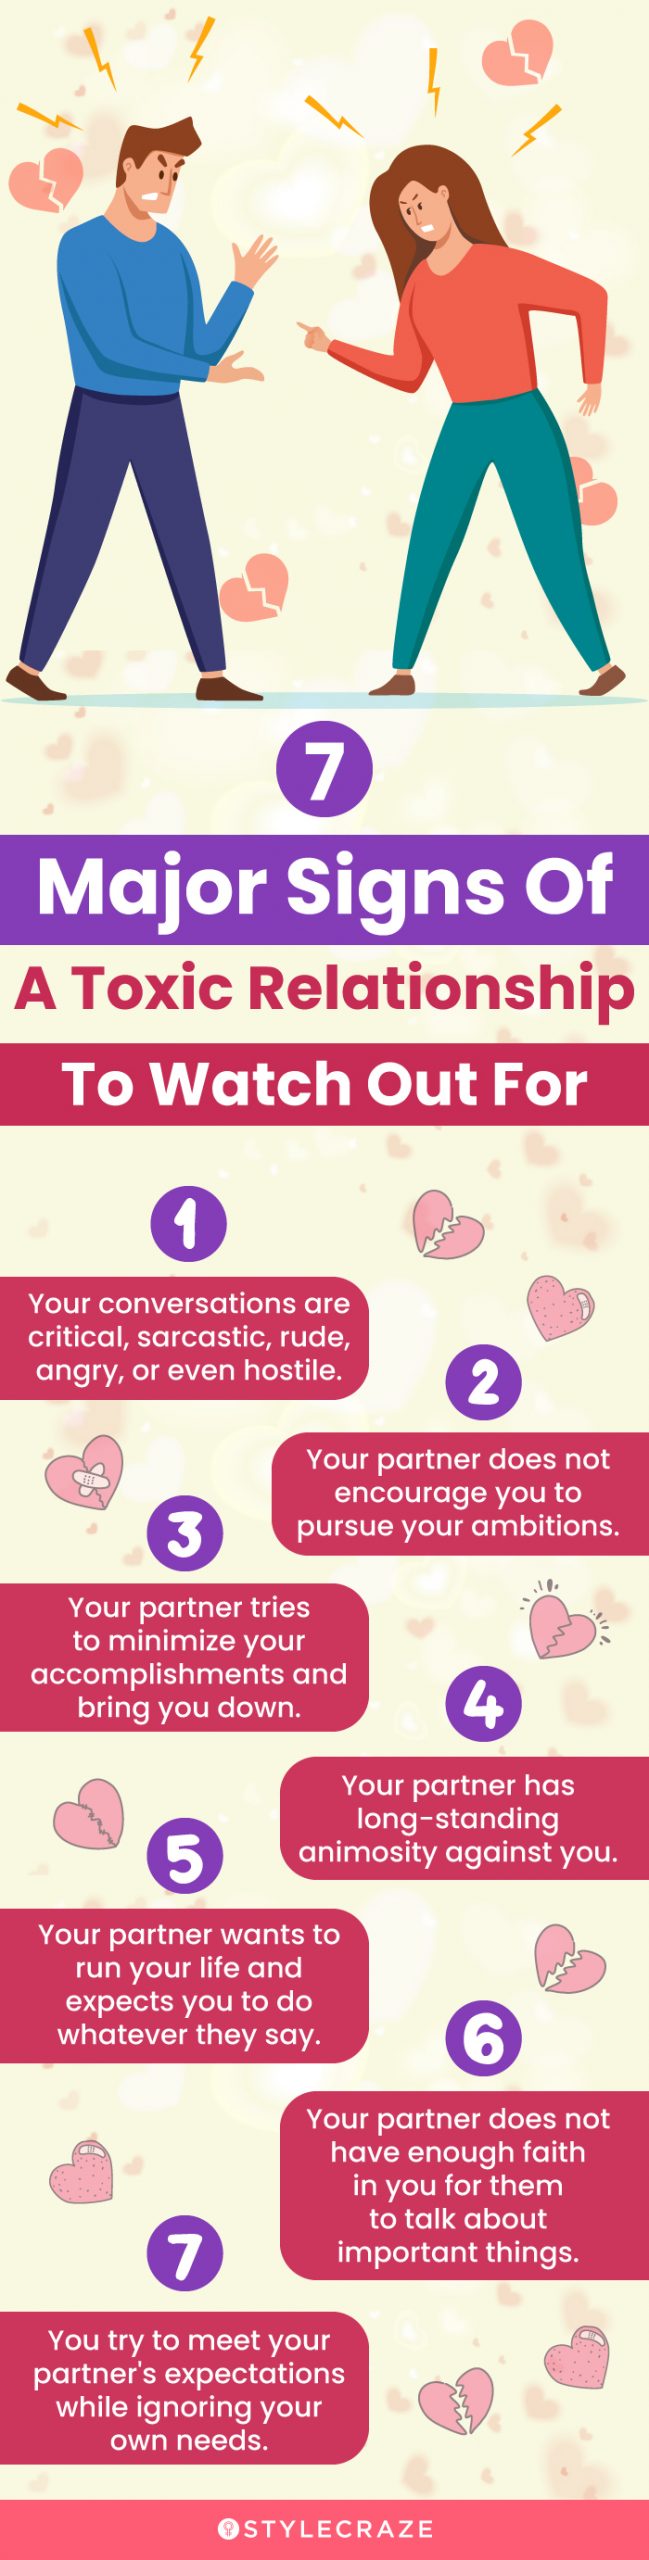 7 major signs of a toxic relationship to watch out for (infographic)